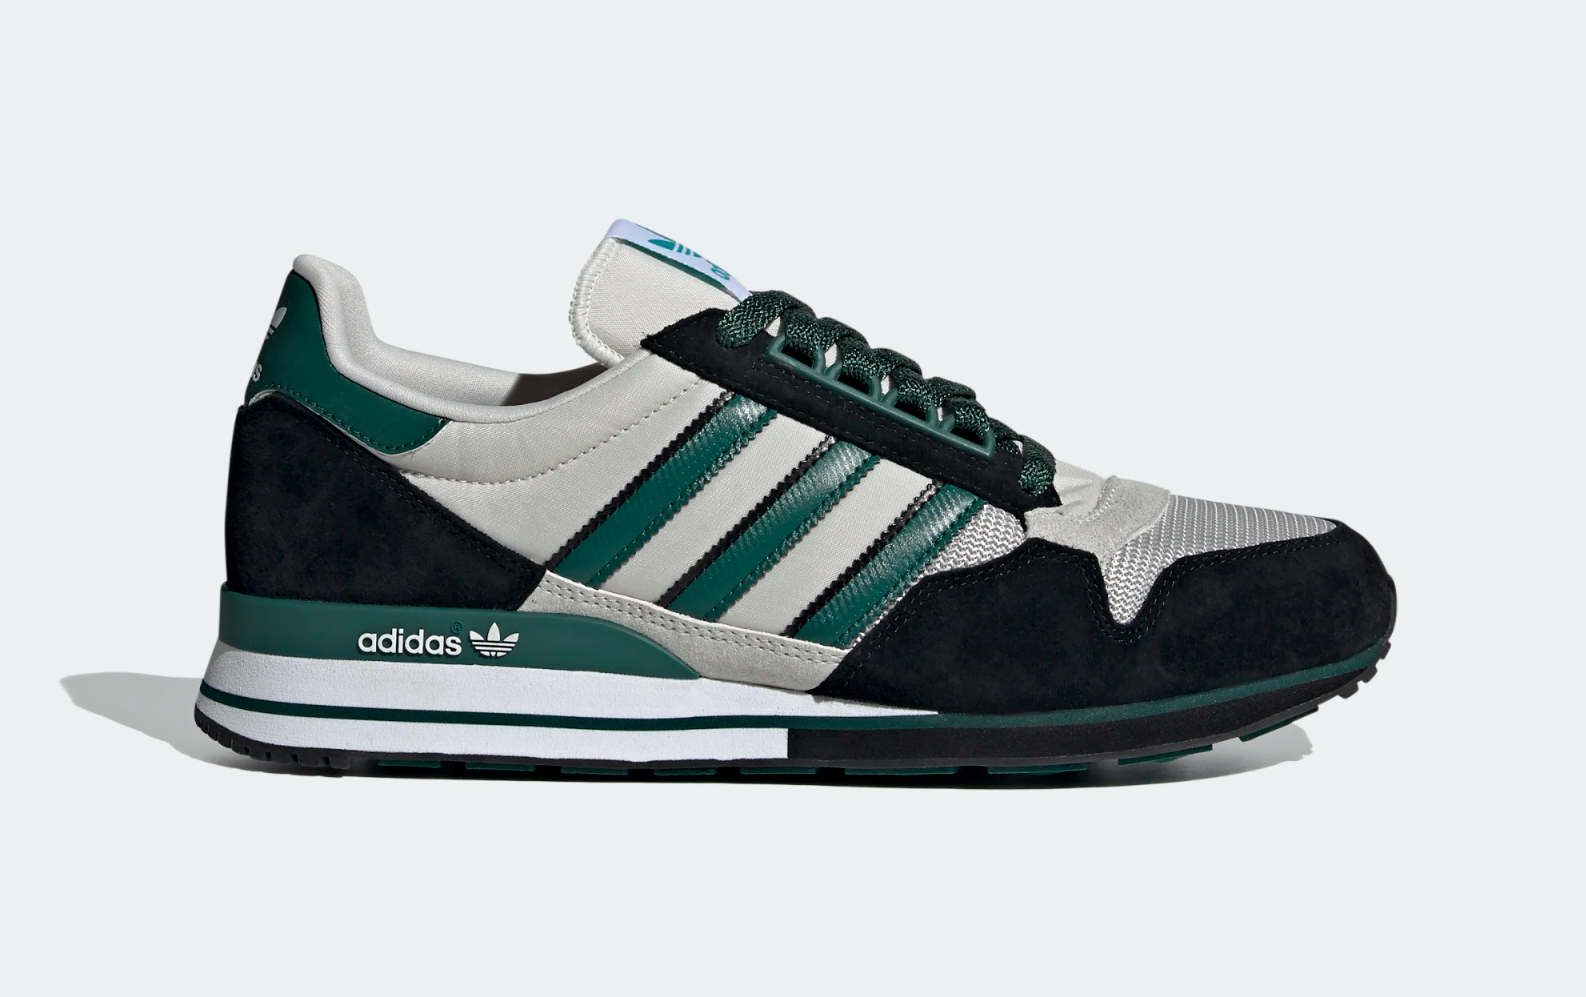 adidas Originals Mens ZX 500 Trainers in Green and Black